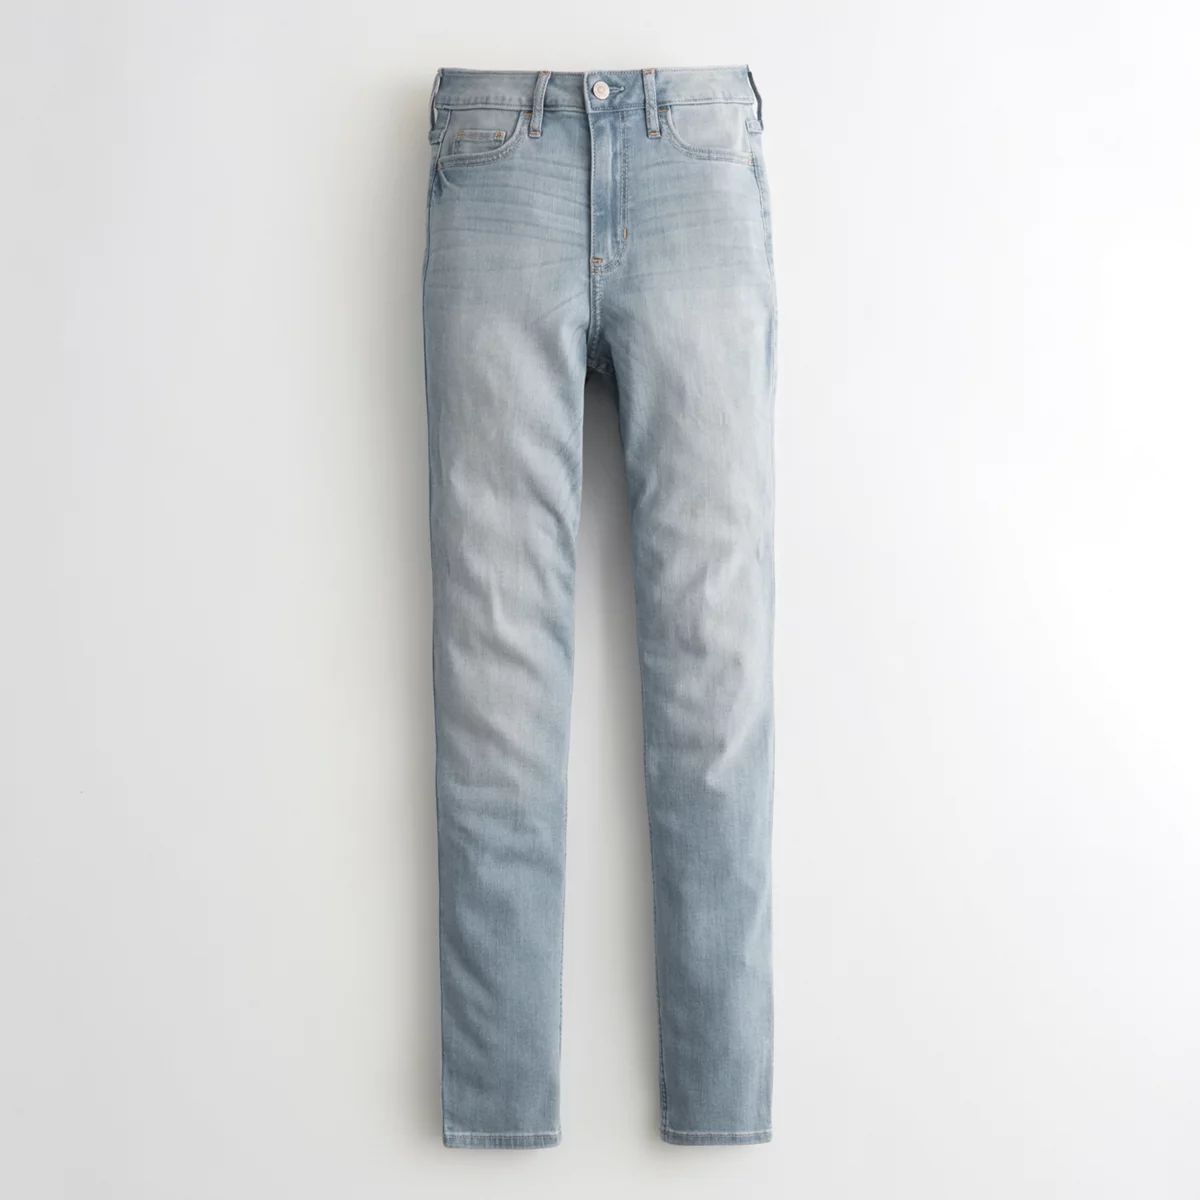 Girls Classic Stretch High-Rise Super Skinny Jeans from Hollister | Hollister US